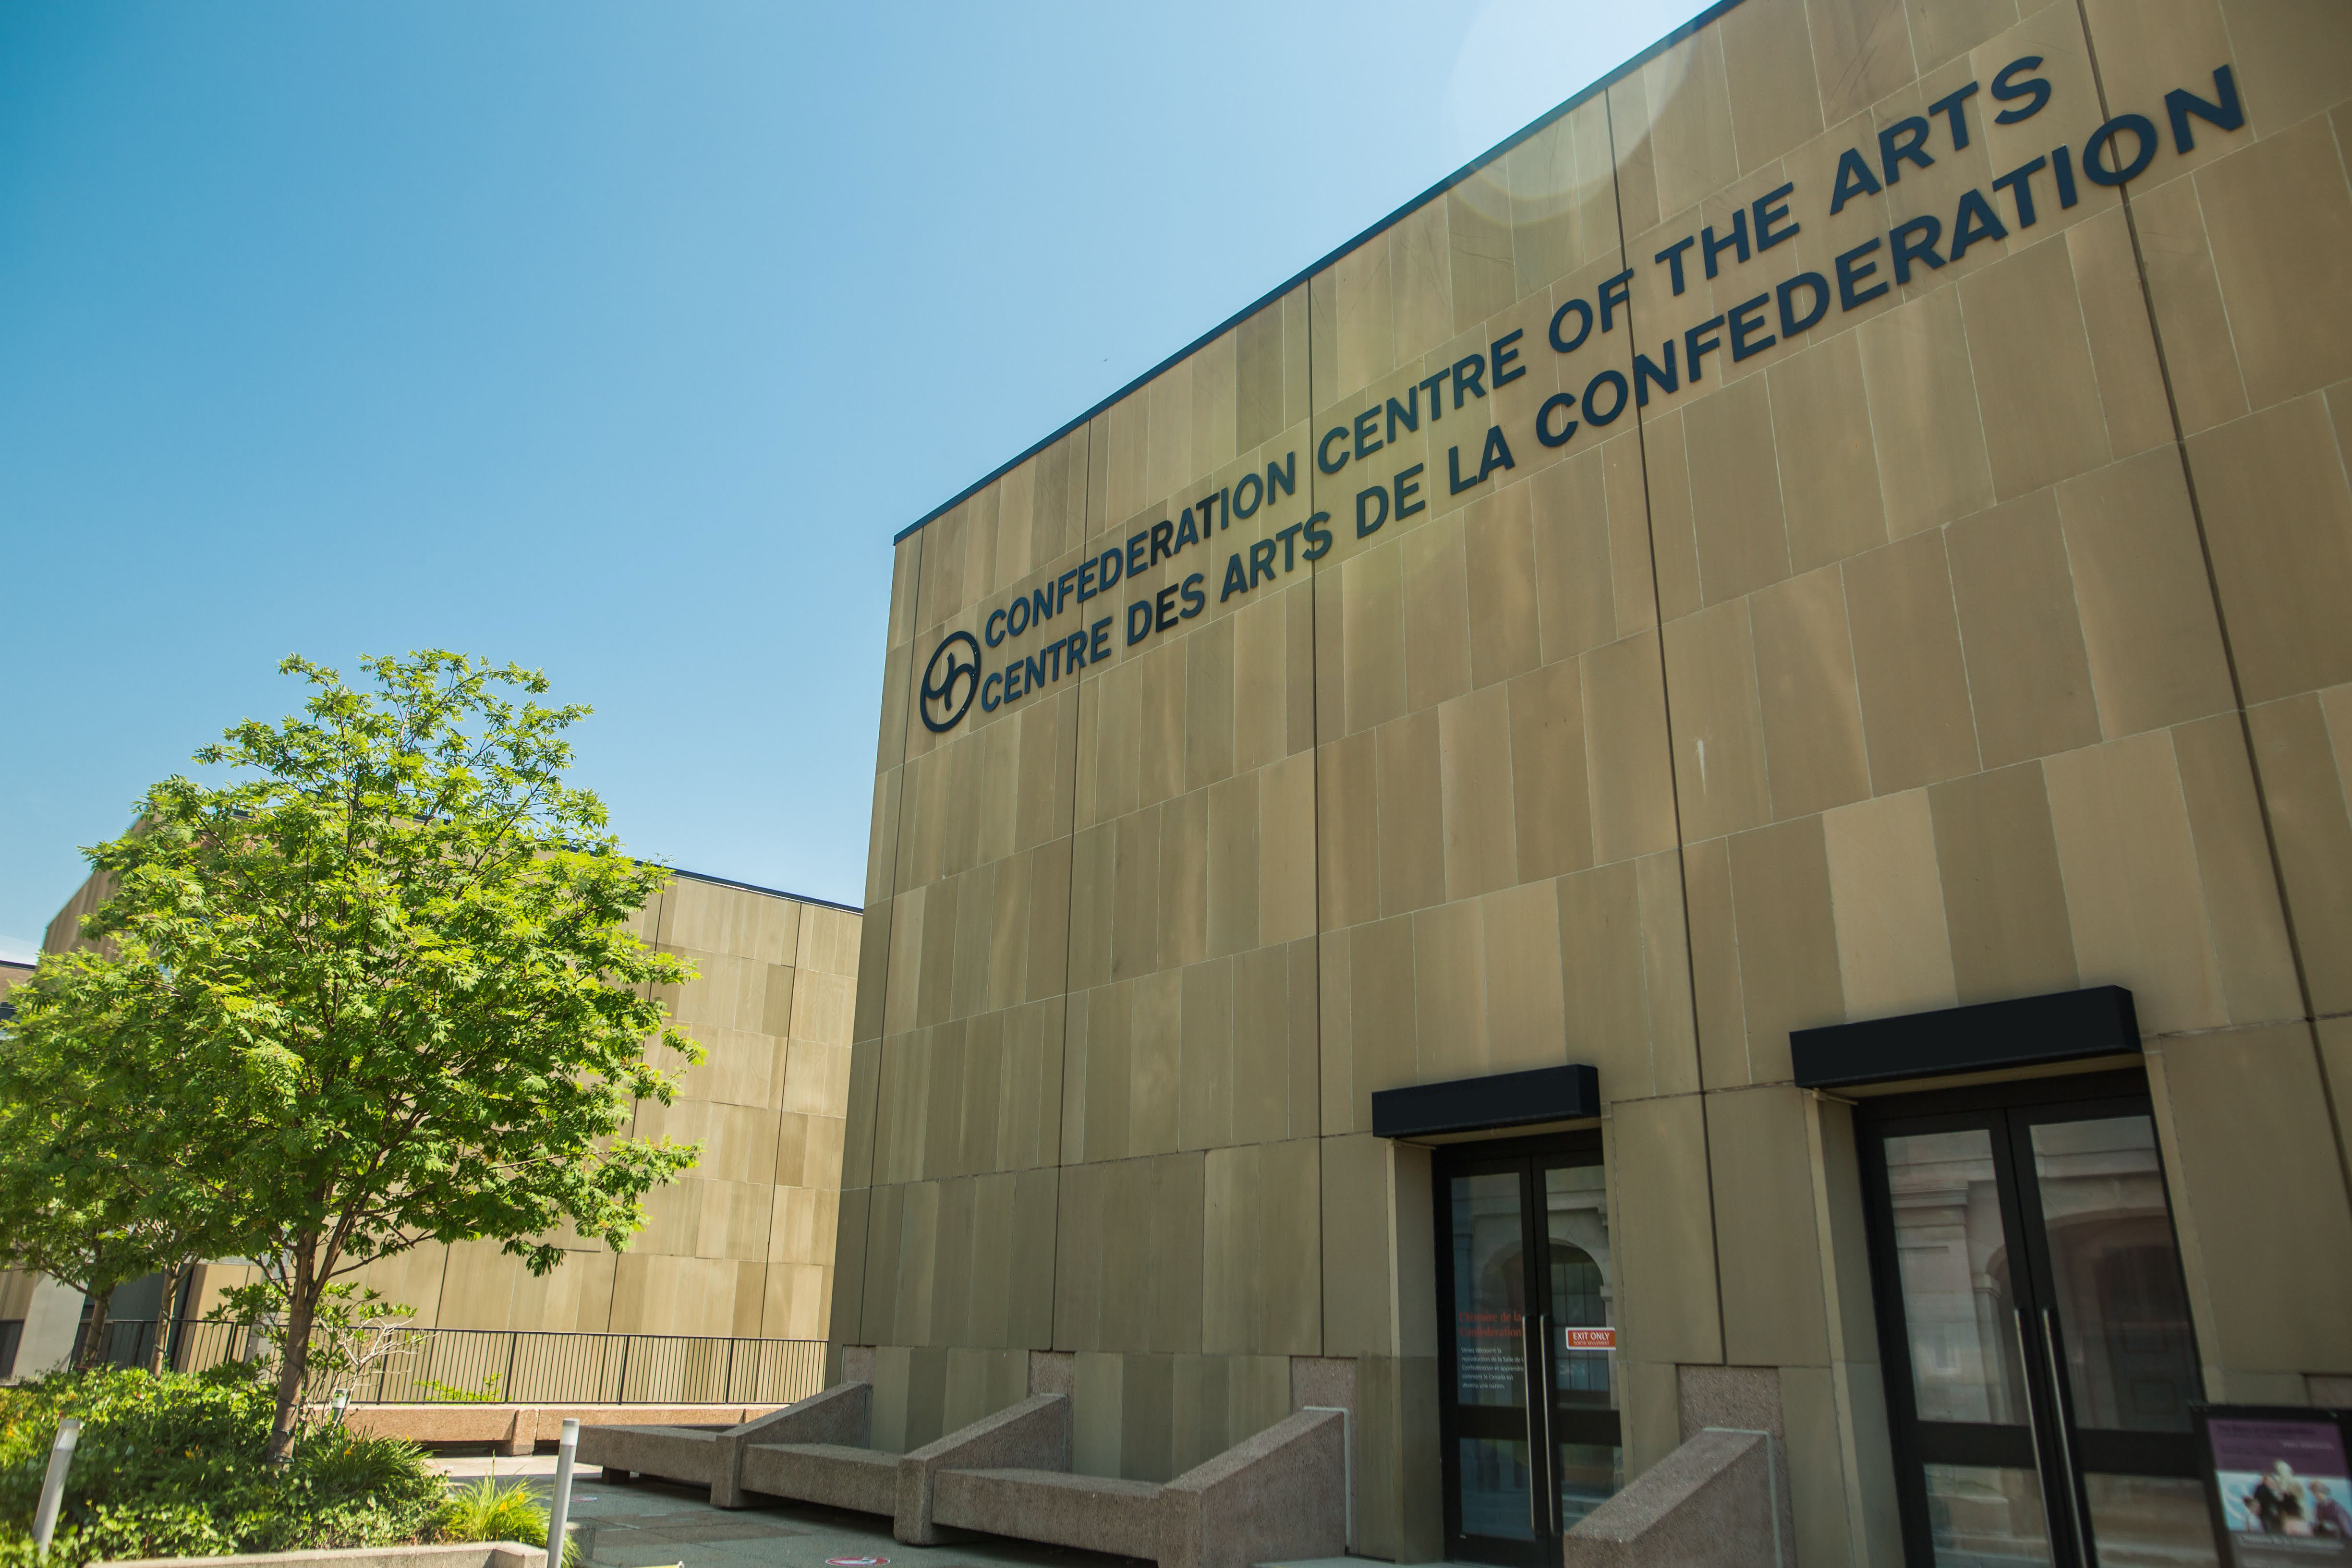 Exterior view of entrance to the Confederation Centre of the Arts